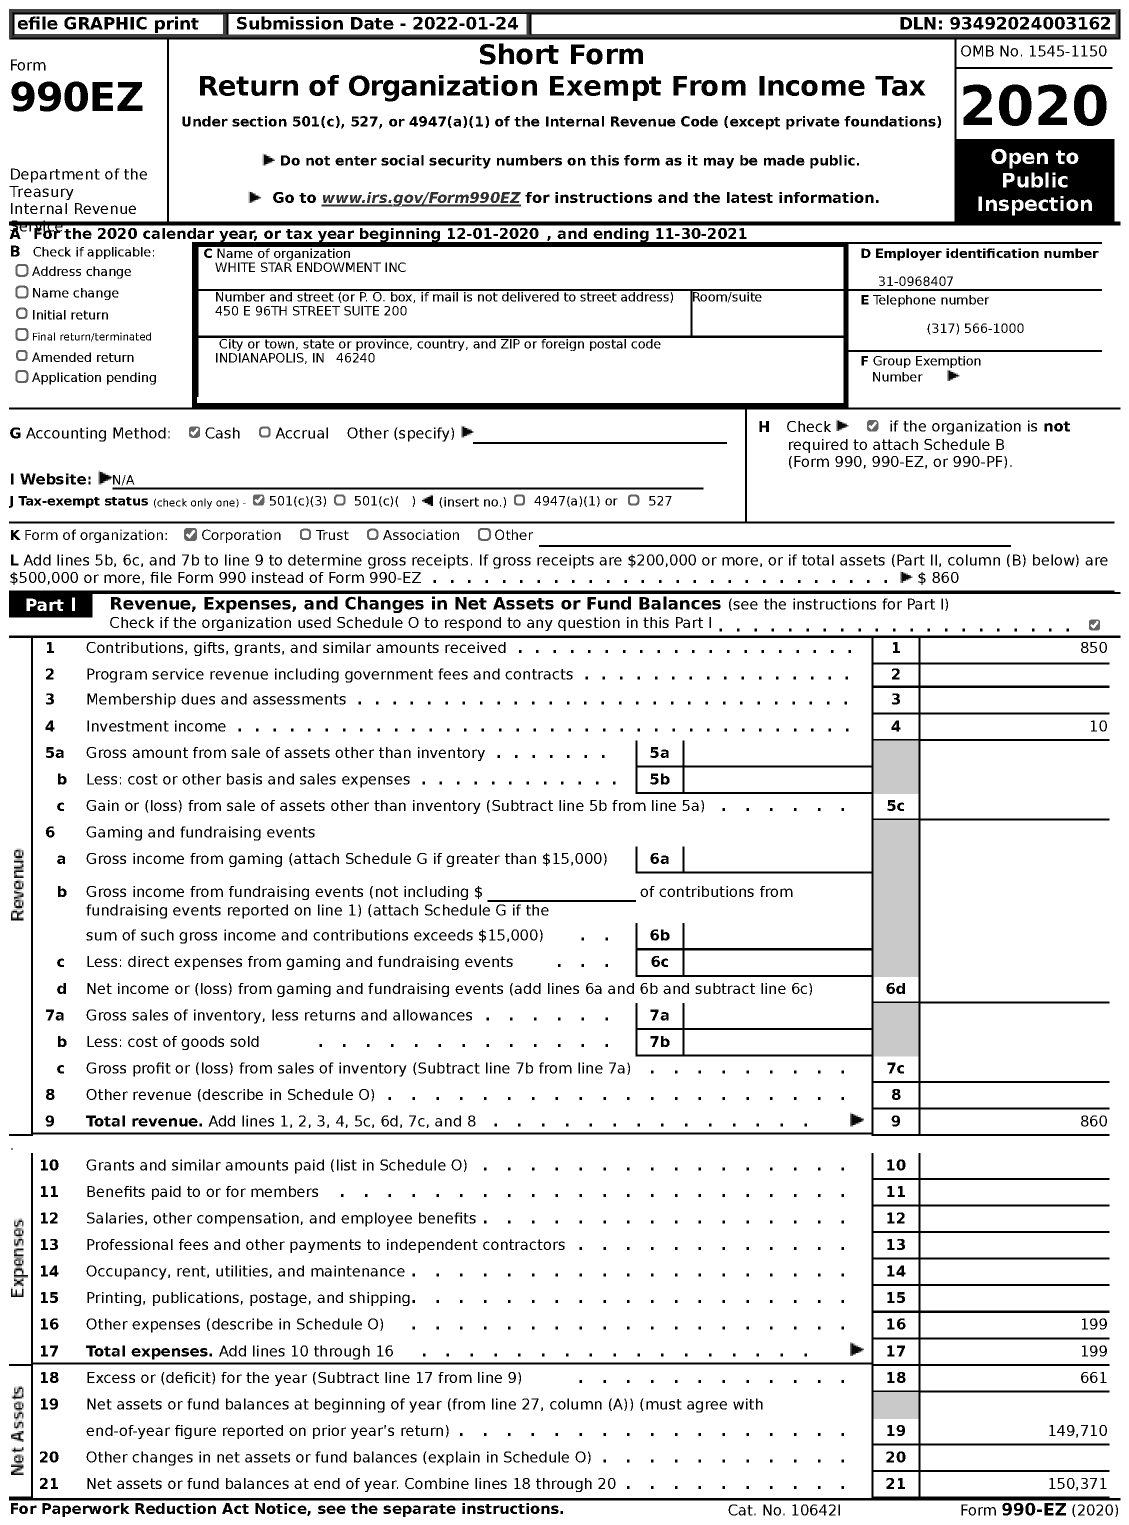 Image of first page of 2020 Form 990EZ for White Star Endowment